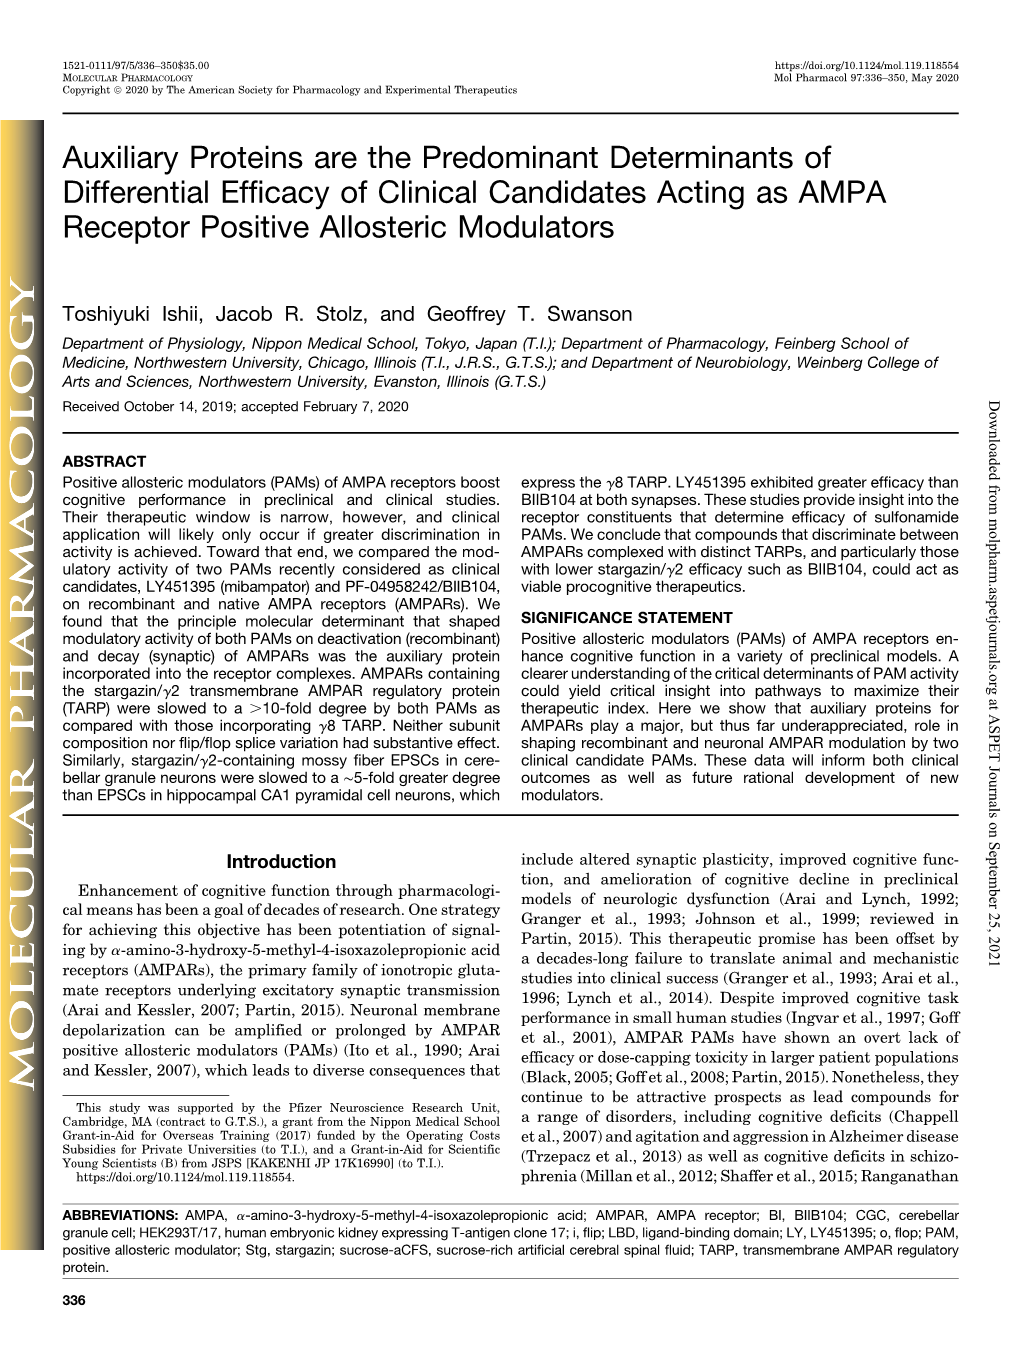 Auxiliary Proteins Are the Predominant Determinants of Differential Efficacy of Clinical Candidates Acting As AMPA Receptor Positive Allosteric Modulators